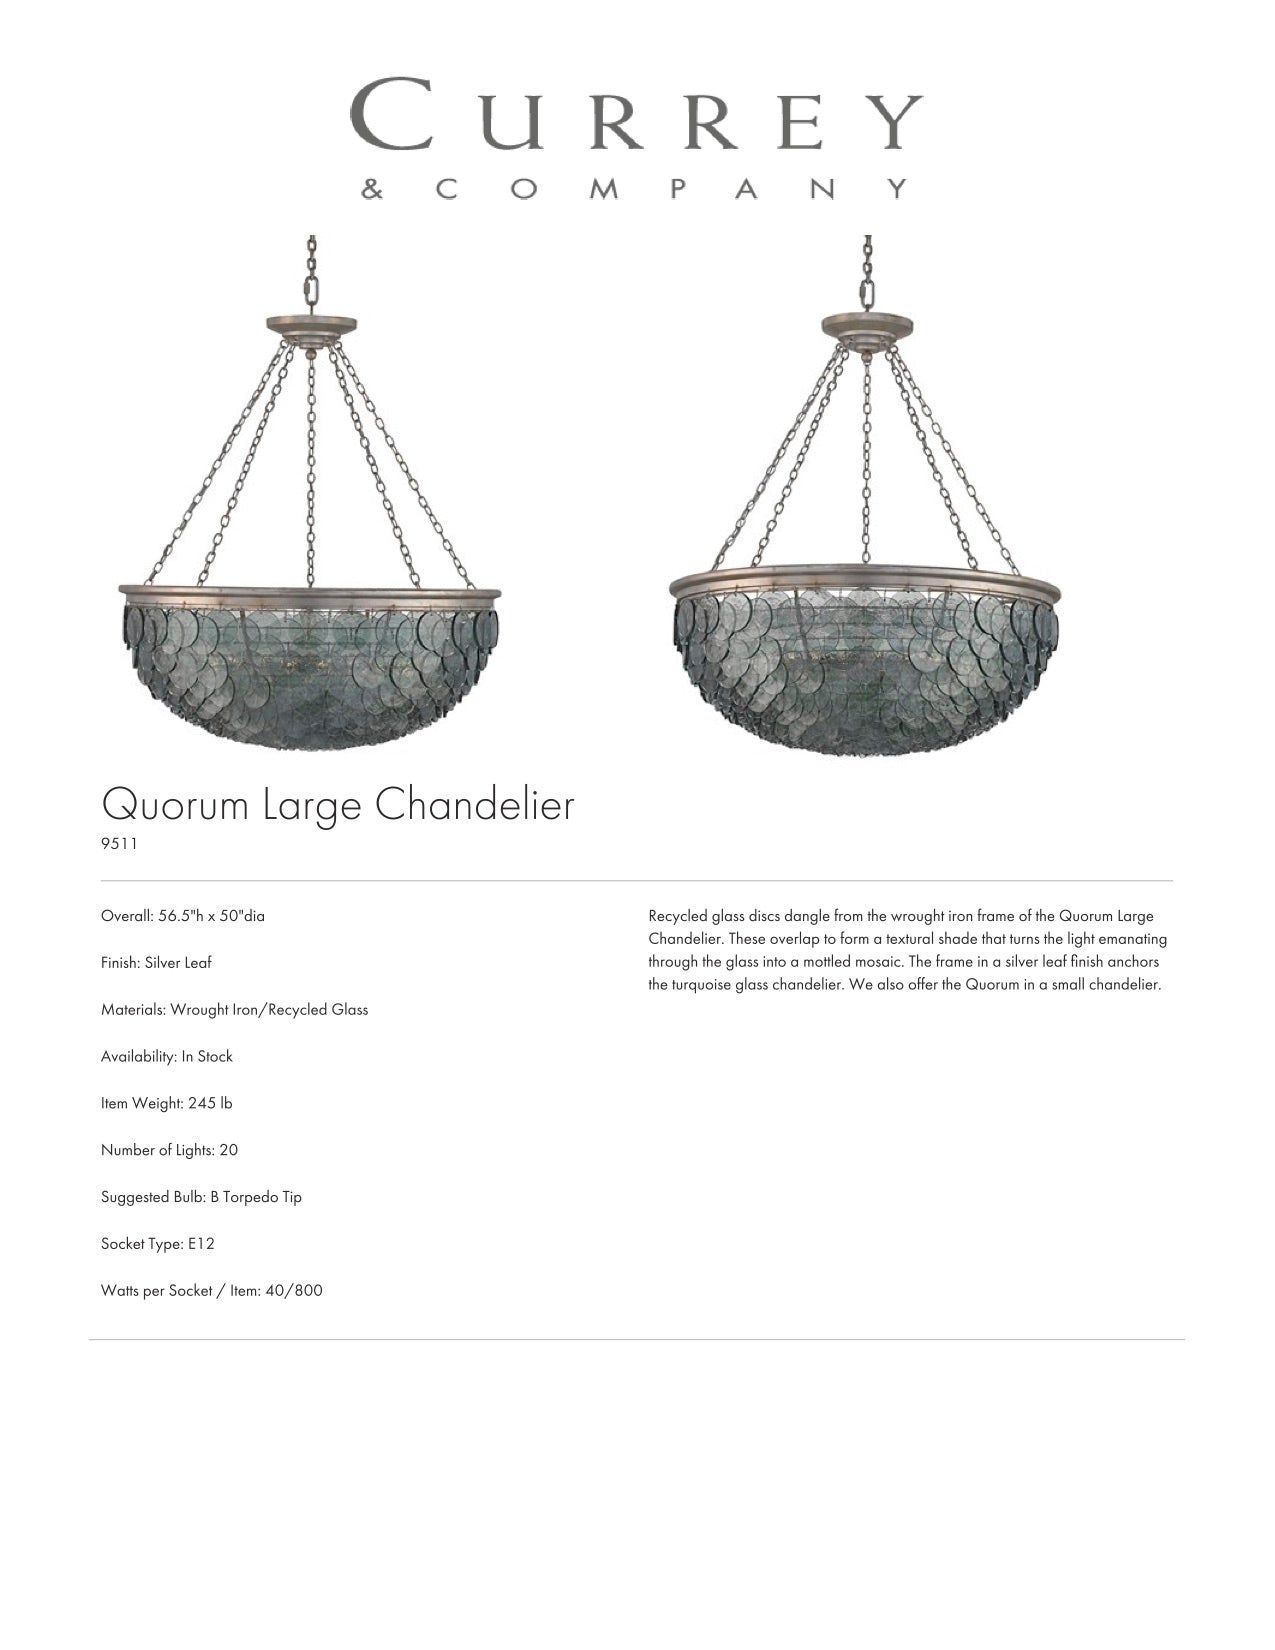 Currey & Company Quorum Large Chandelier Tearsheet